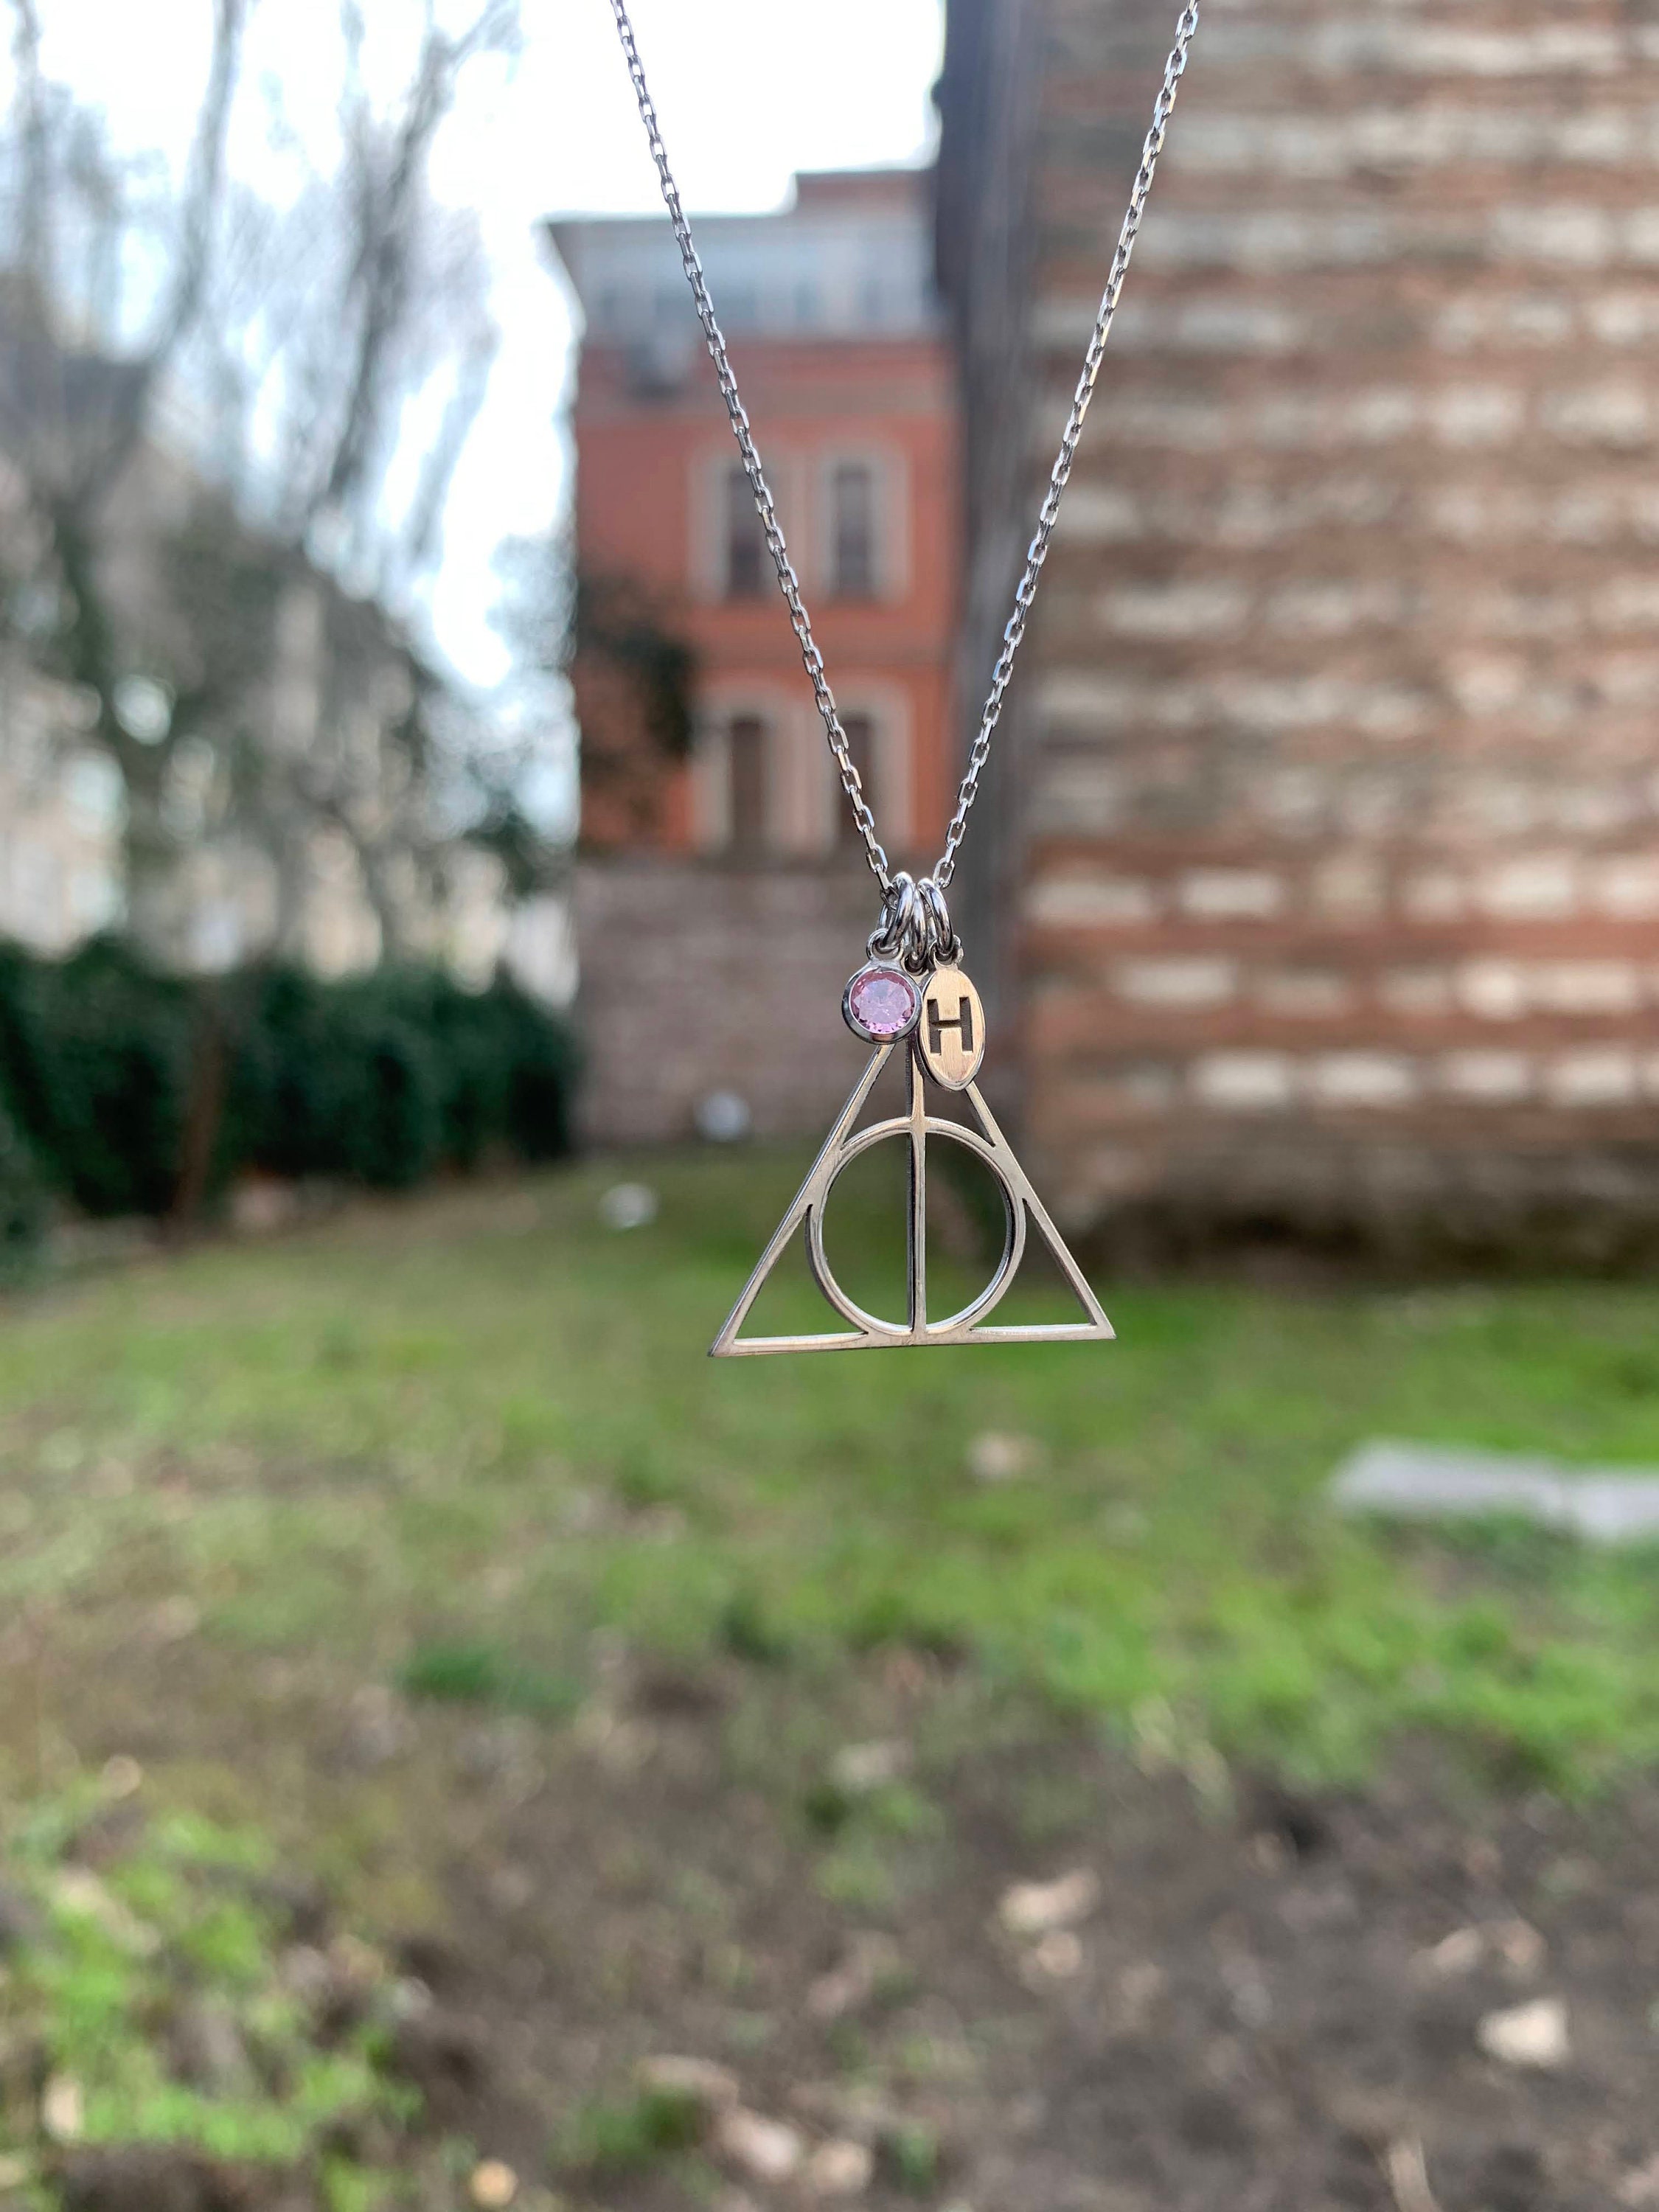 CIJ SALE - Tiny Gold Deathly Hallows Necklace - Gold Pendant